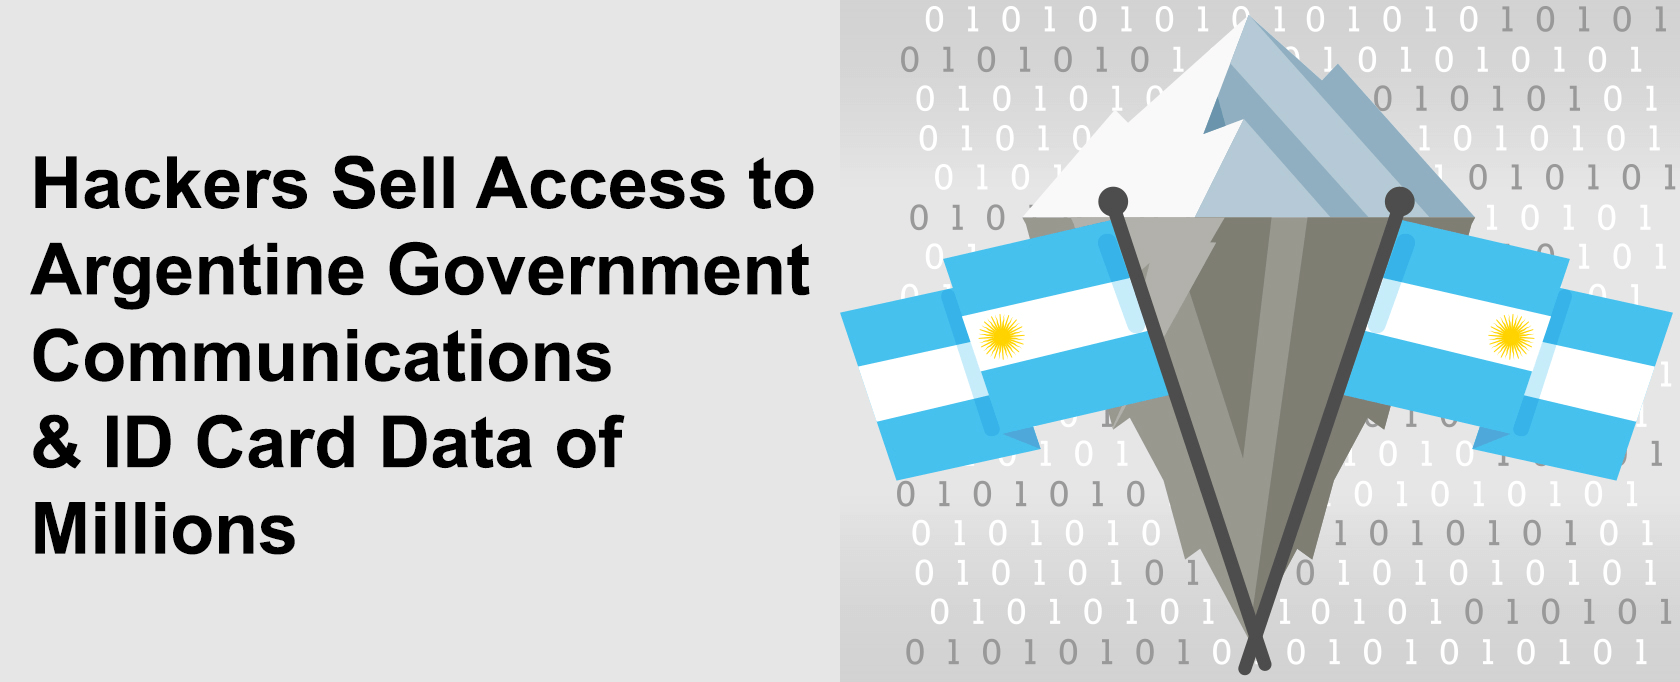 Hackers Sell Access to Argentine Government Communications & ID Card Data of Millions